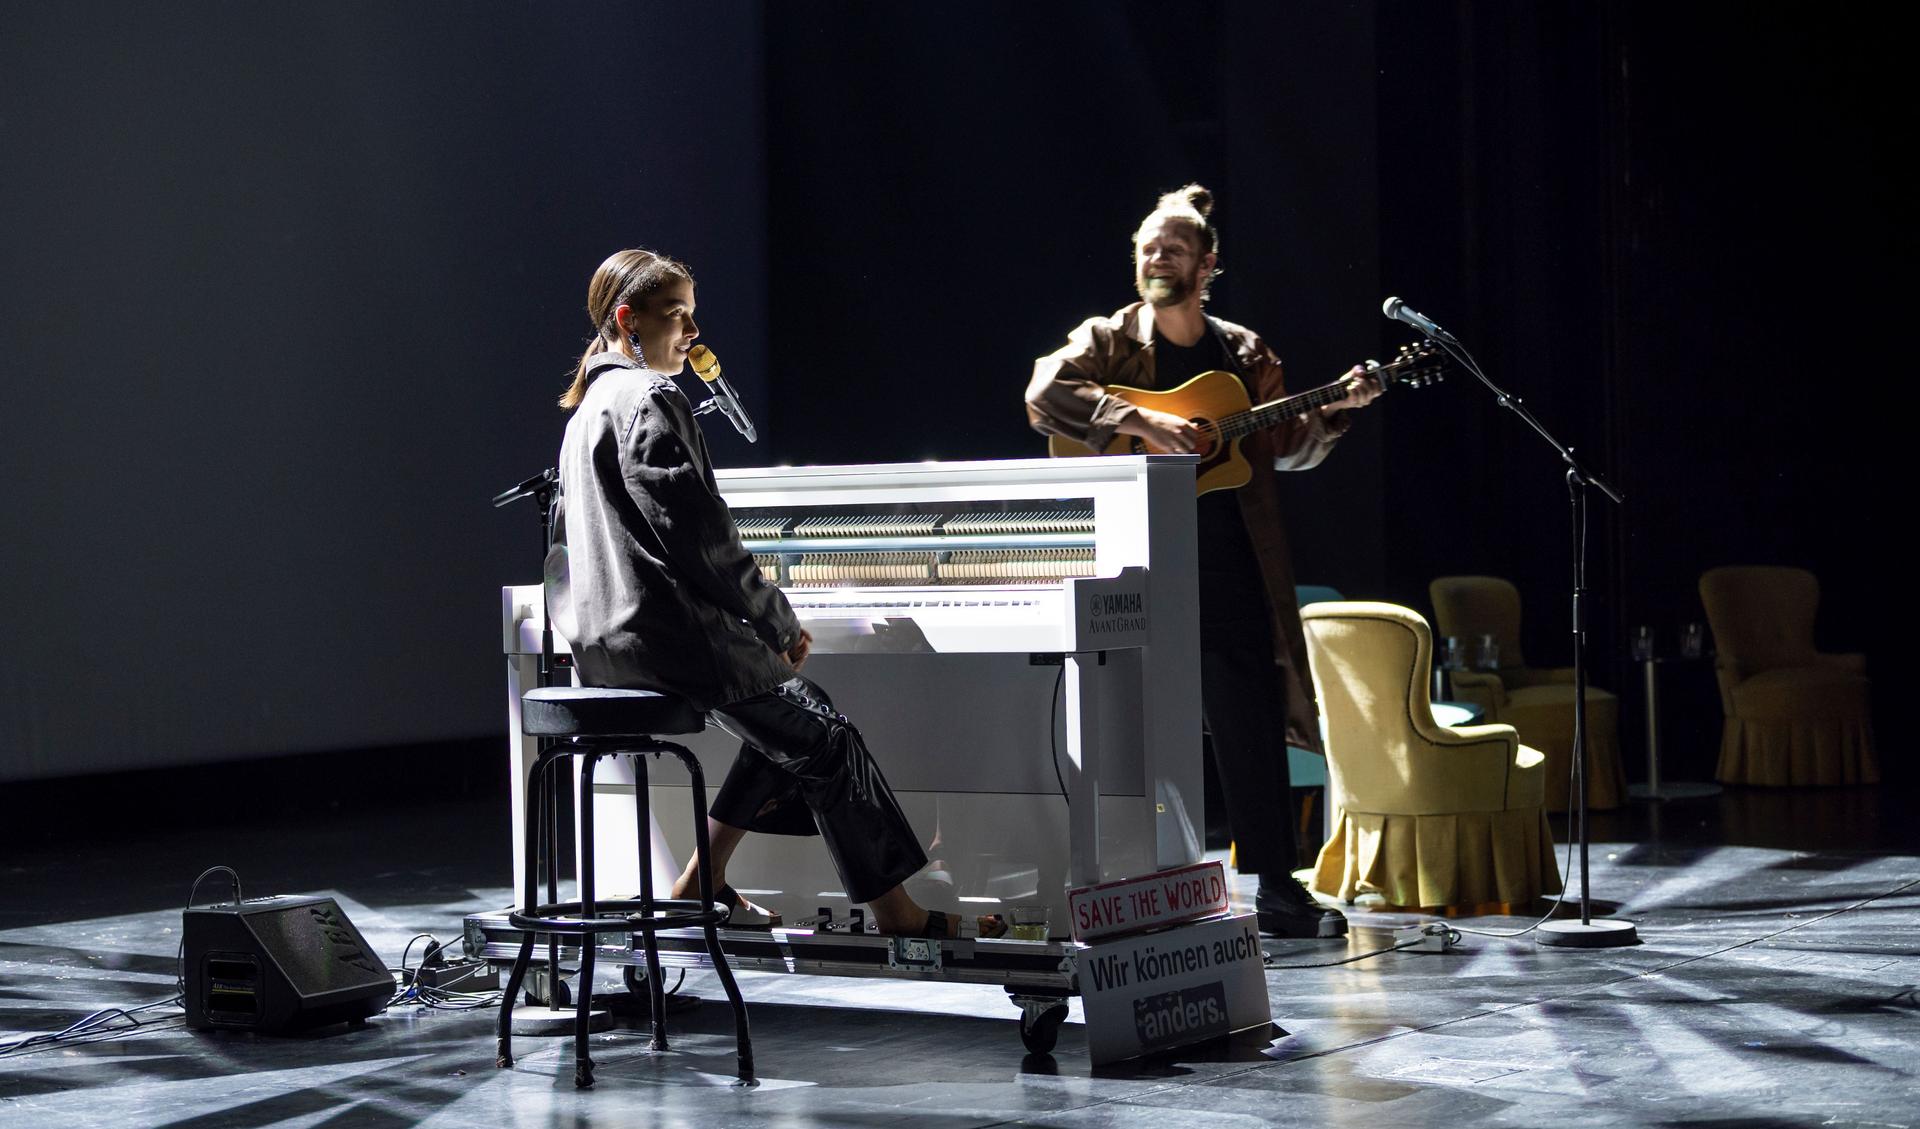 A women is sitting at a piano and is playing it. Next to her is a guy playing a guitar and smiling at her. The two are on a stage.